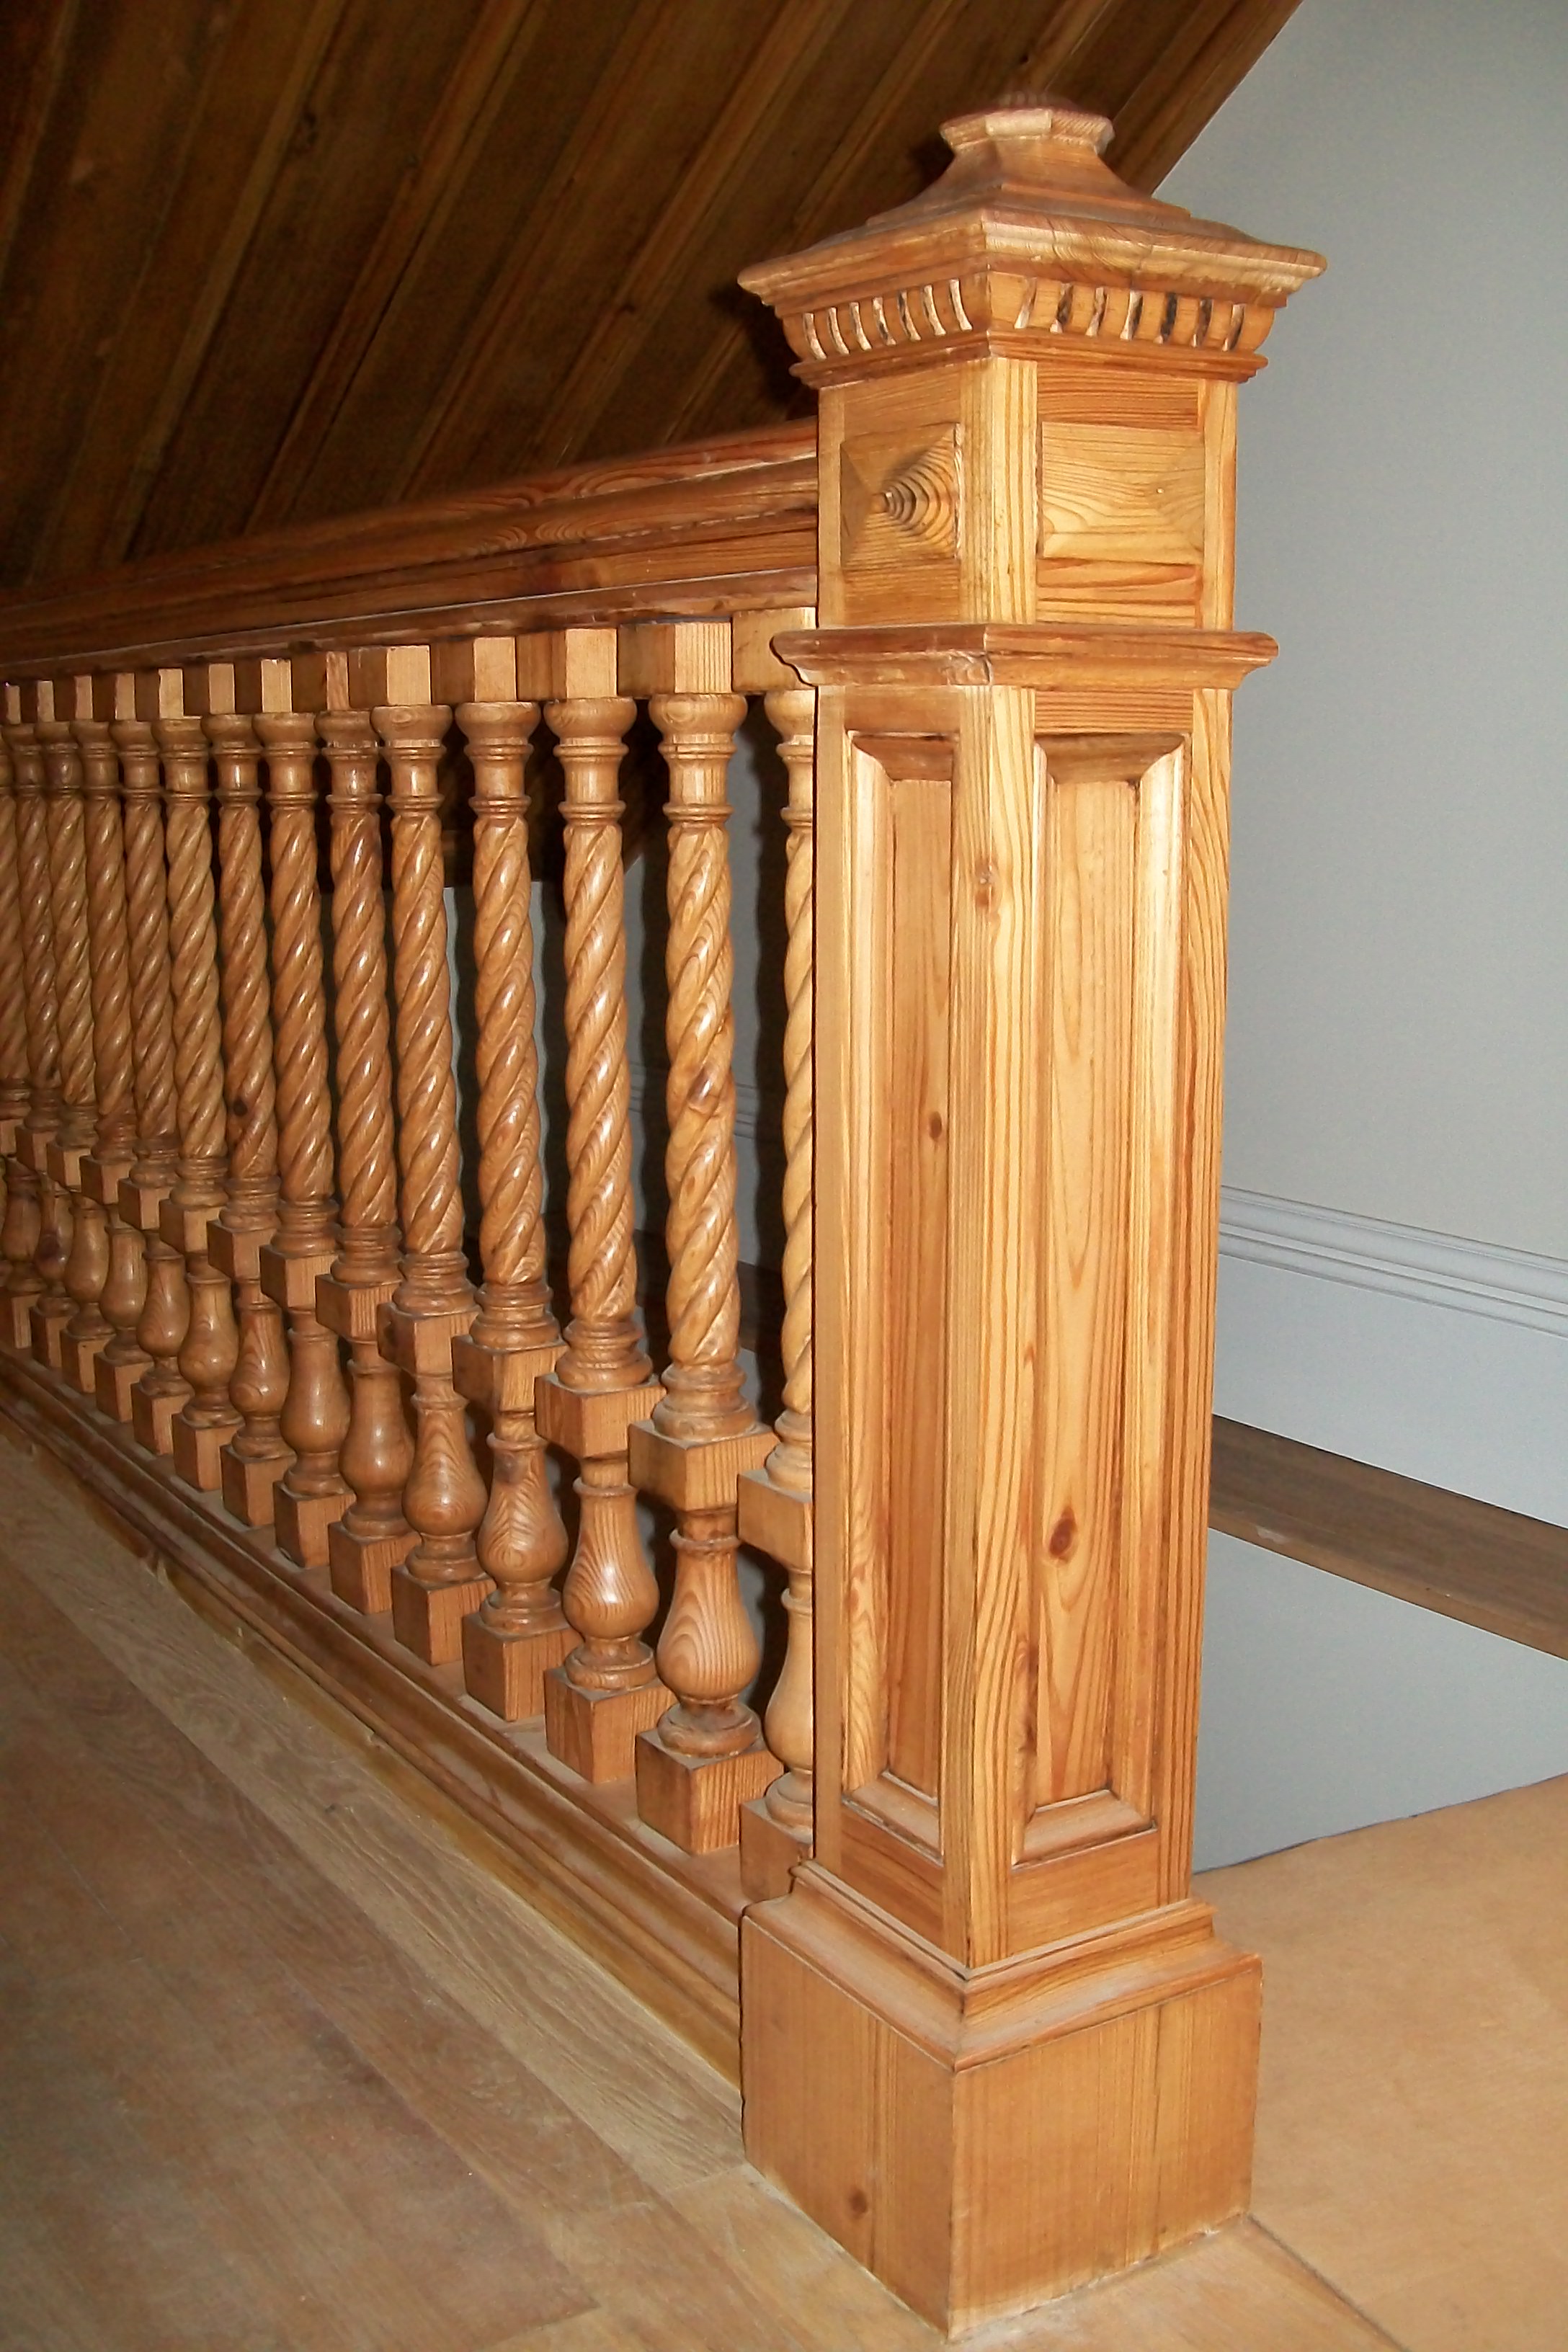 pitch pine newel post, spindles, rope-twist, reclaimed pitch pine, specialist joinery, bespoke, custom made, conservation, hand made, newel posts,